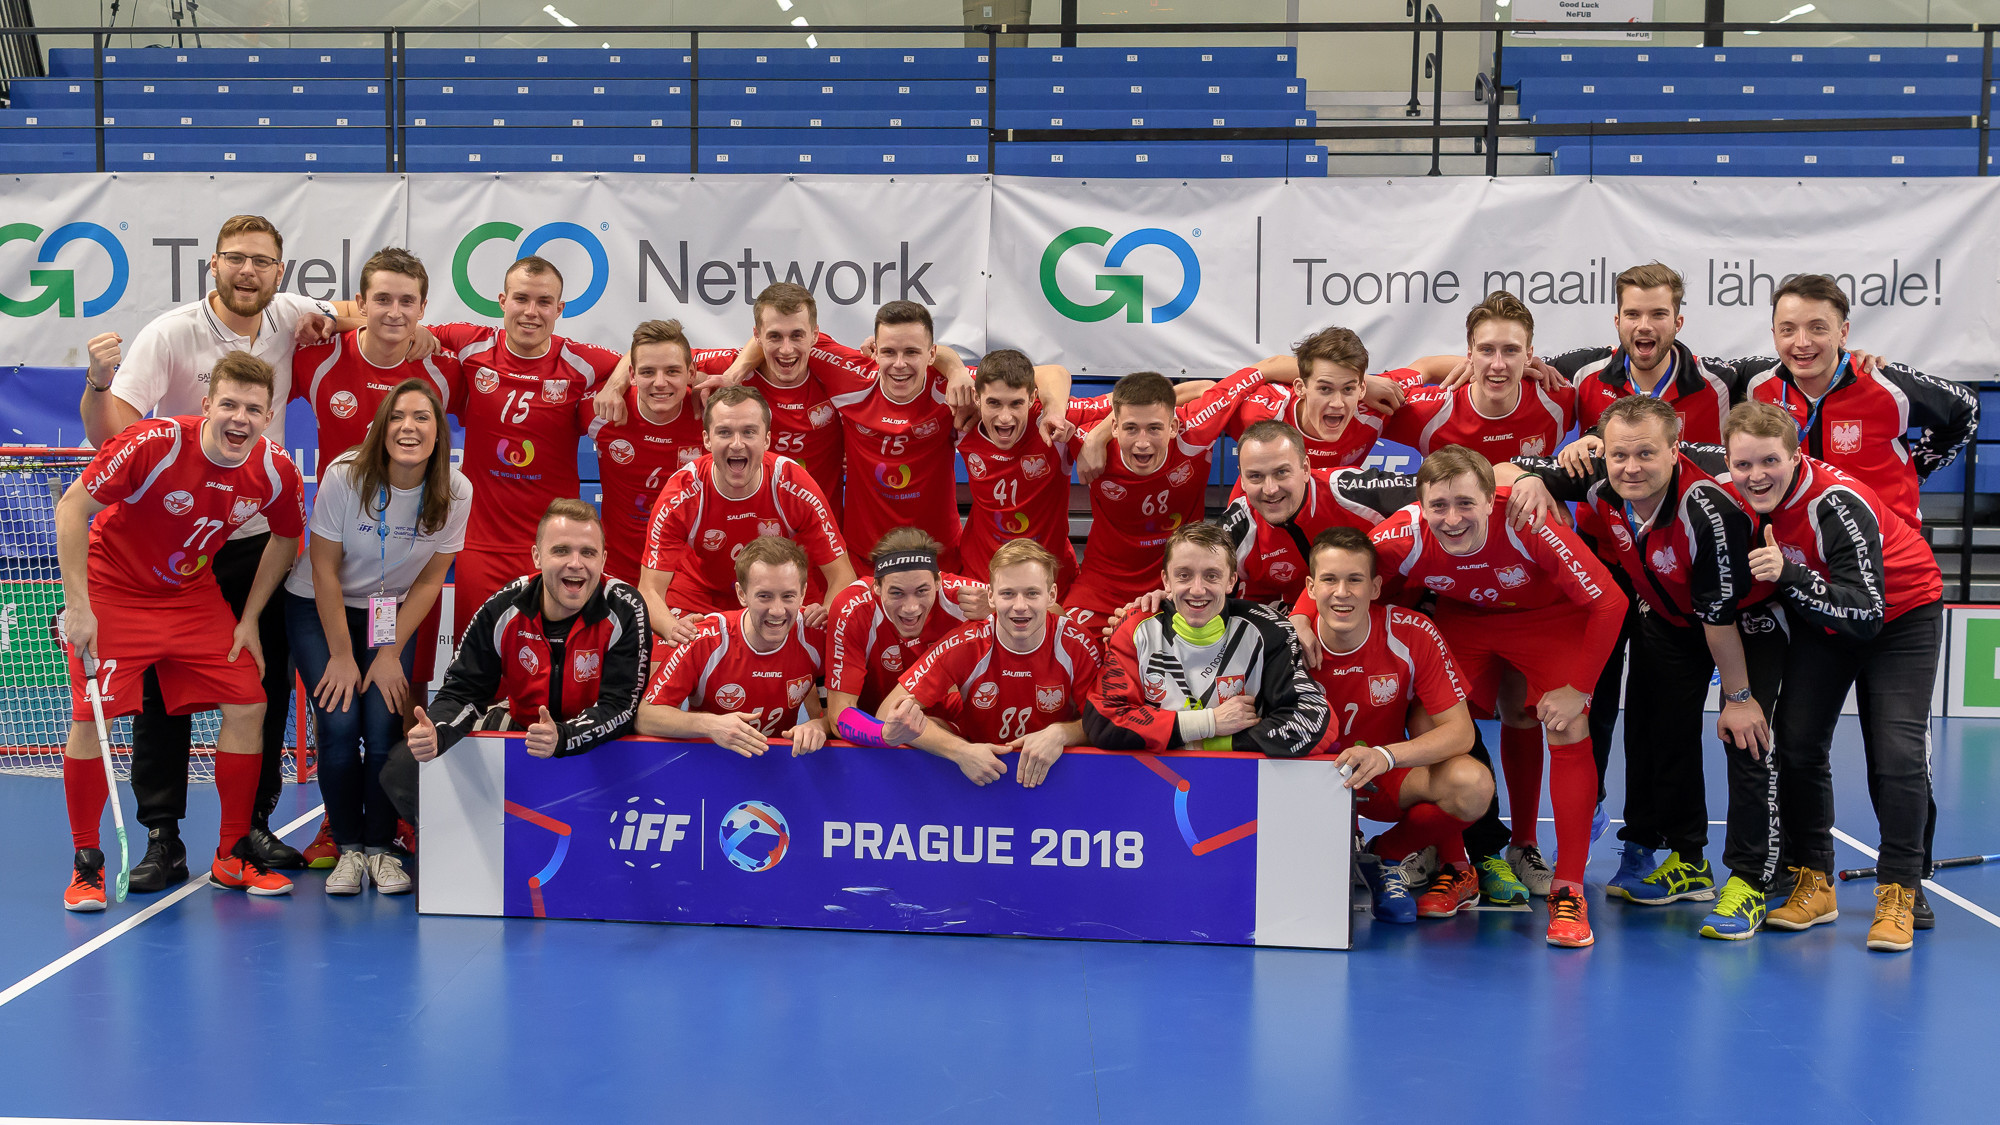 Poland beat The Netherlands 6-2 to book their place in Prague in December ©IFF/Flickr